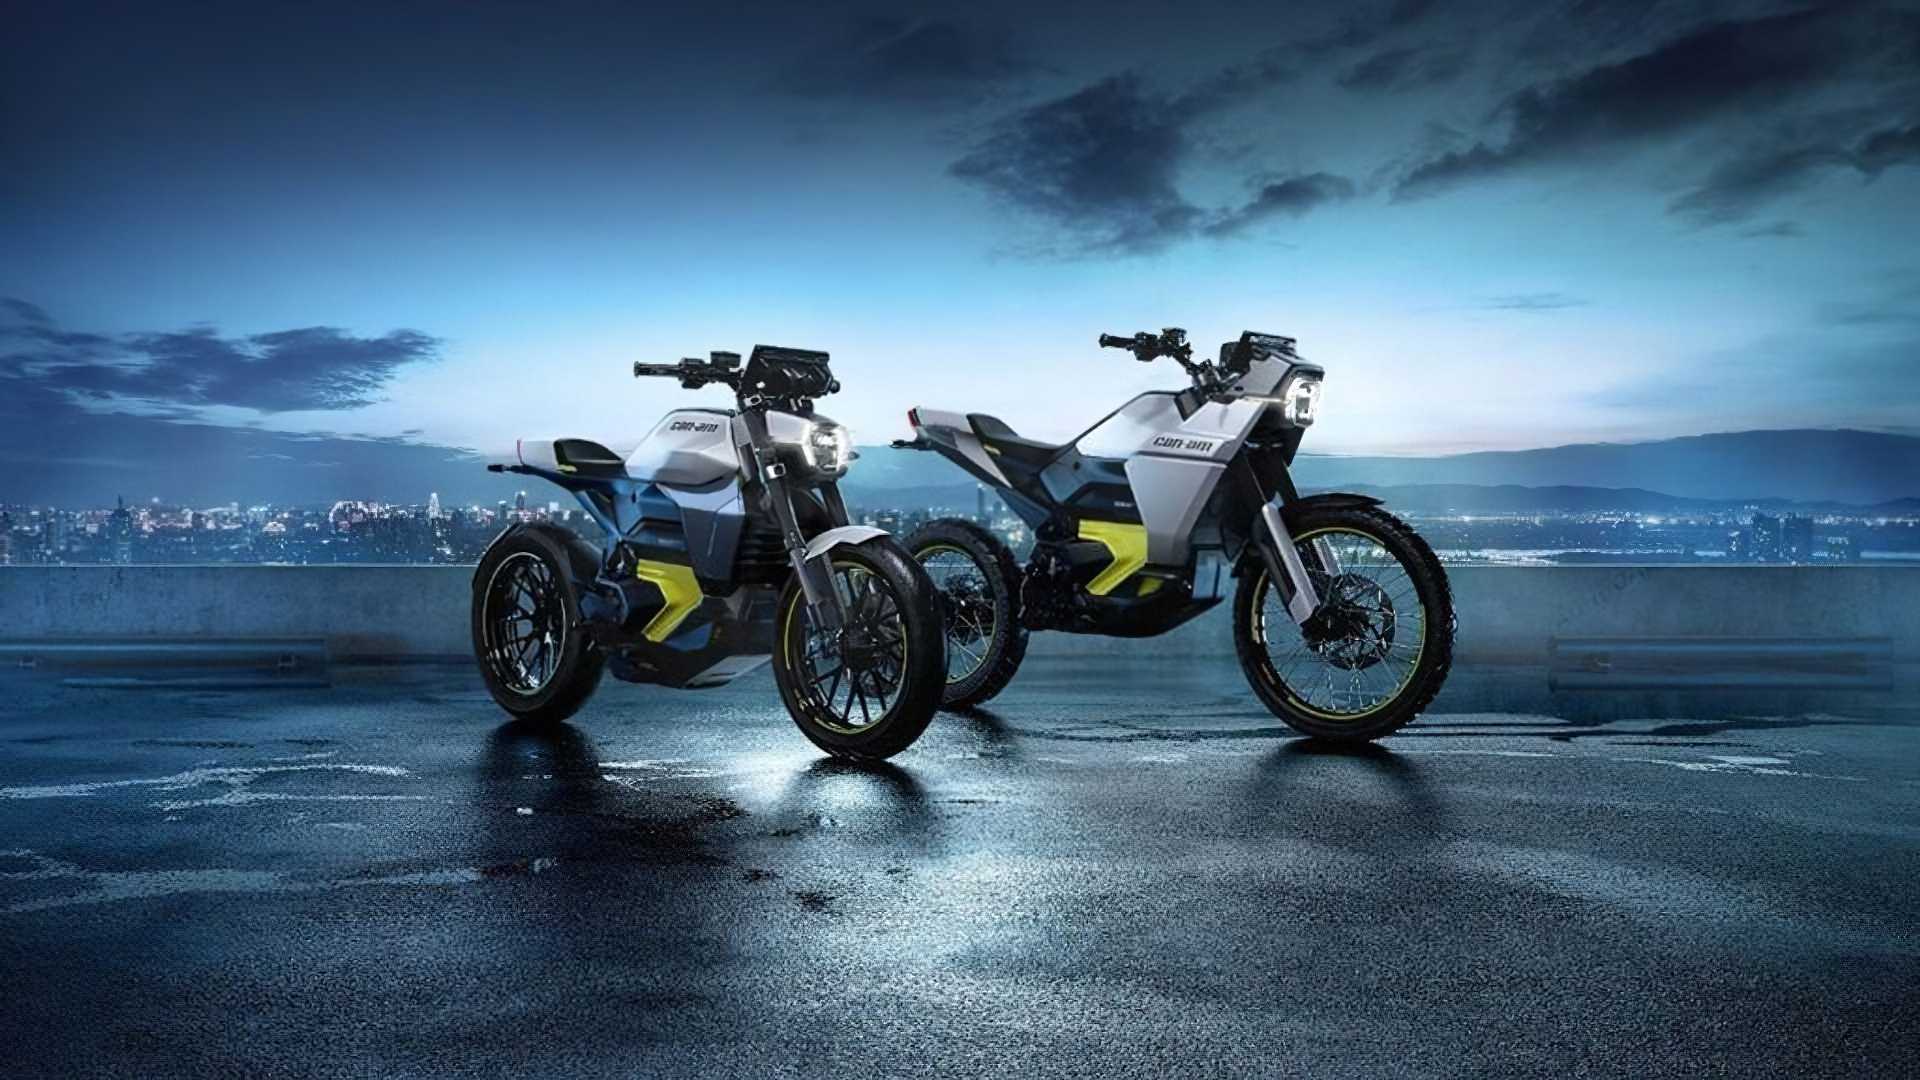 Can-Am announces electric motorcycles
- also in the MOTORCYCLES.NEWS APP